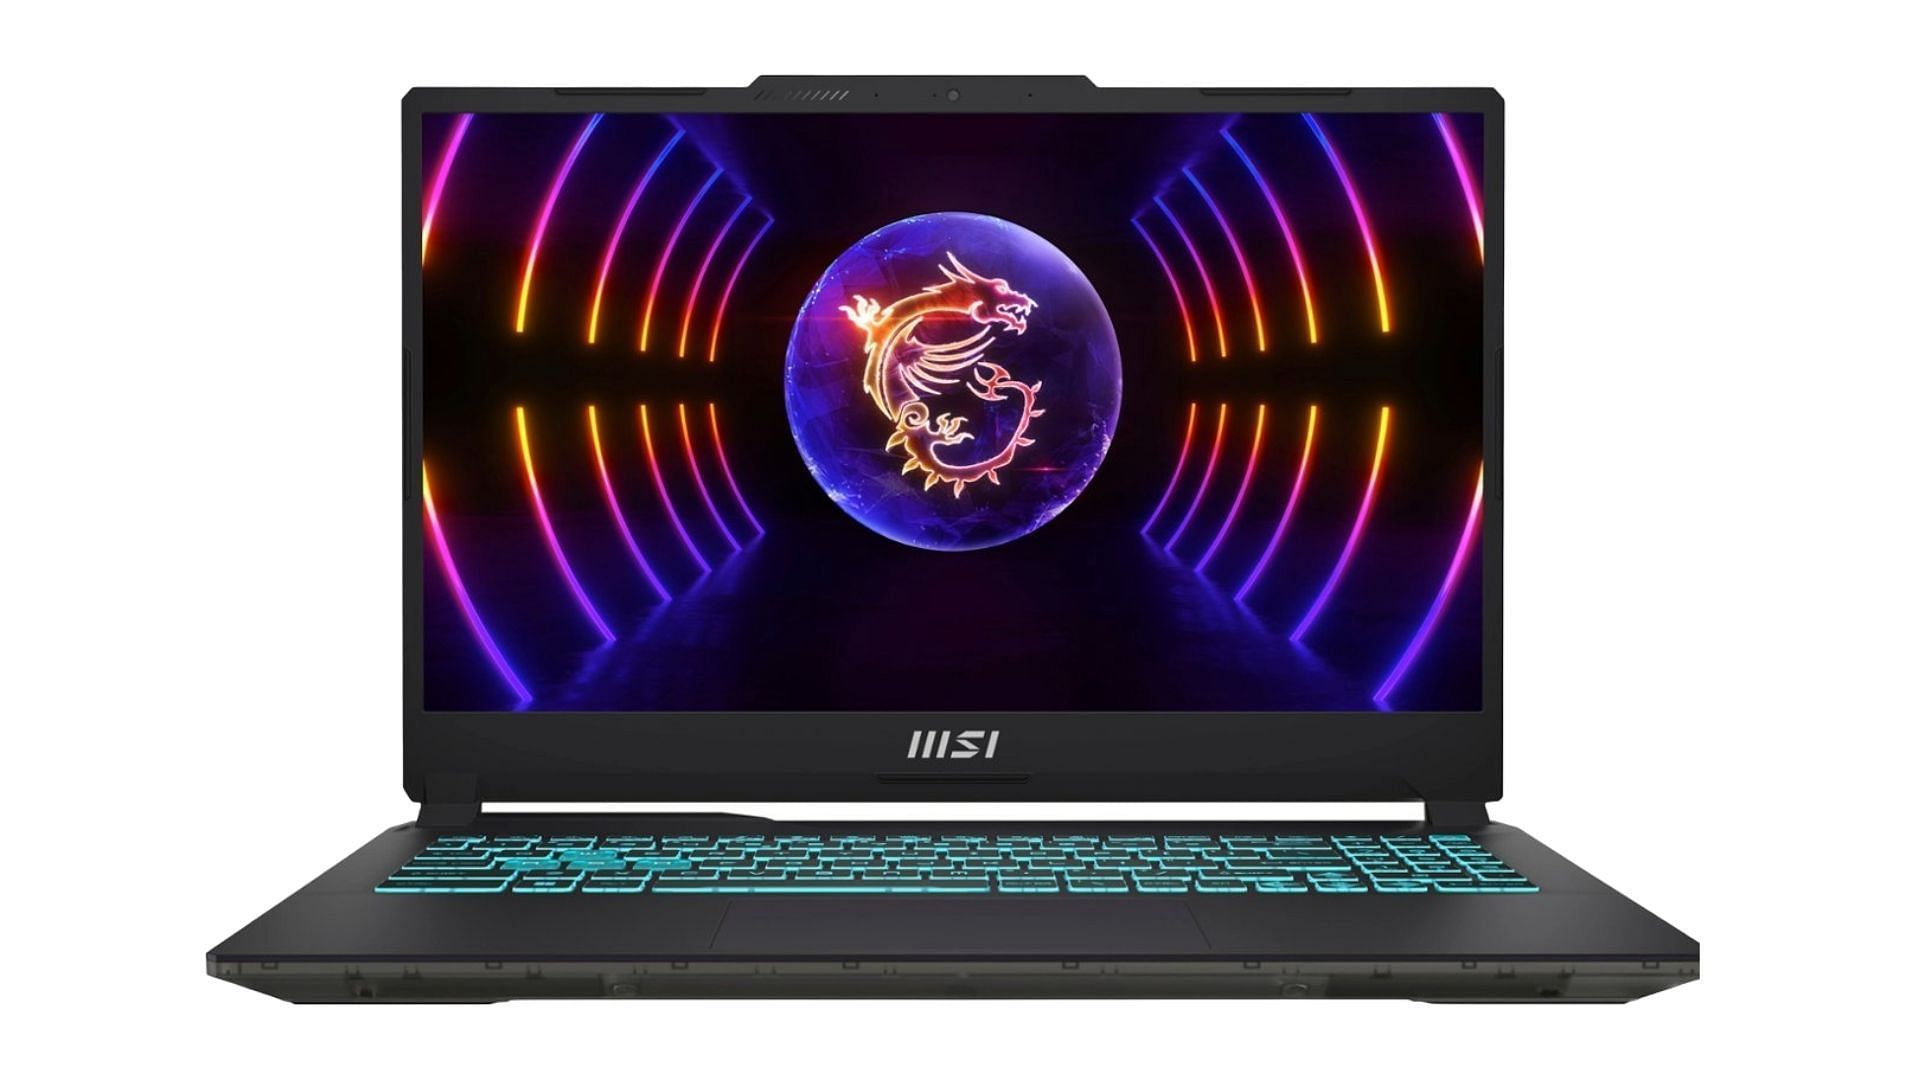 The MSI Cyborg 15 is among the best 15-inch gaming laptops (Image via MSI)